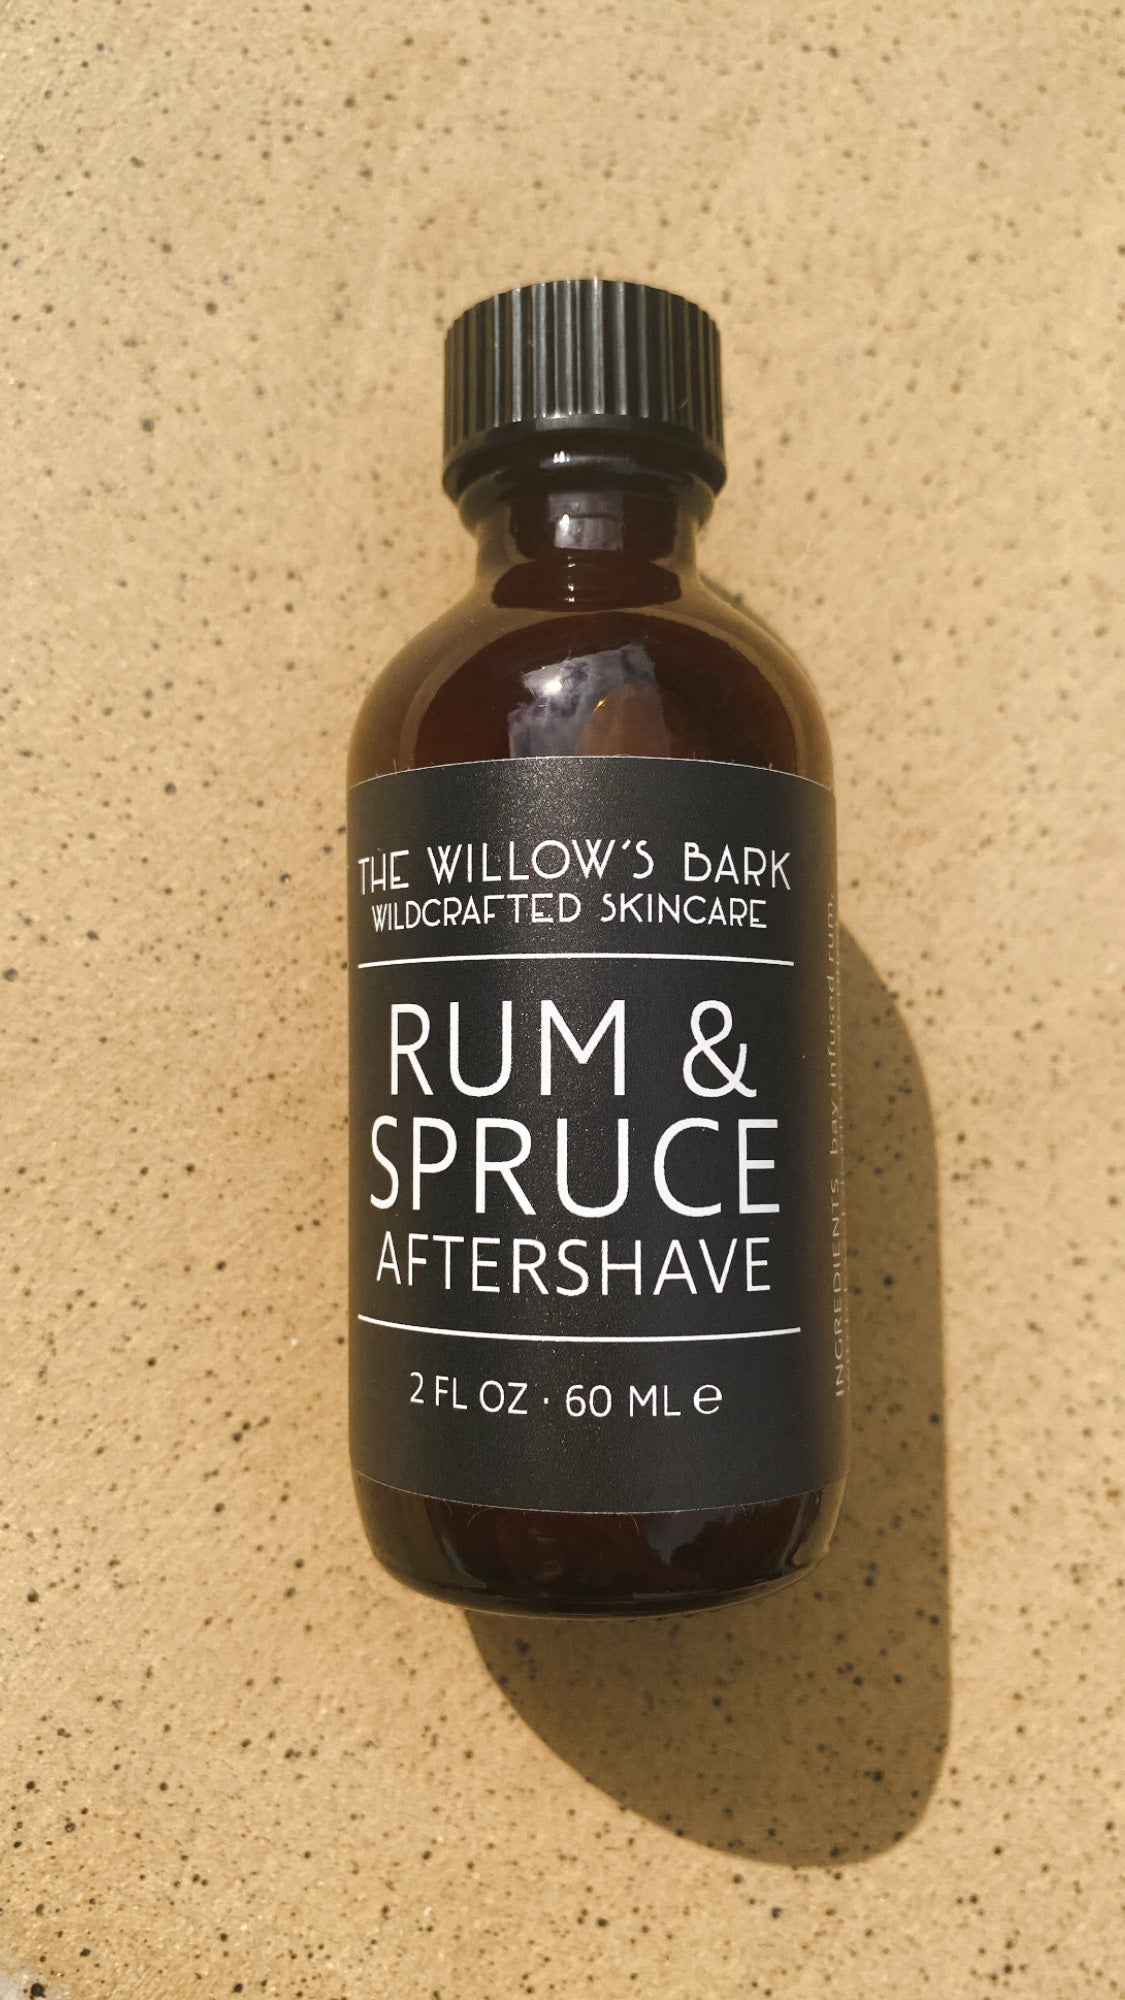 Rum + Spruce Aftershave